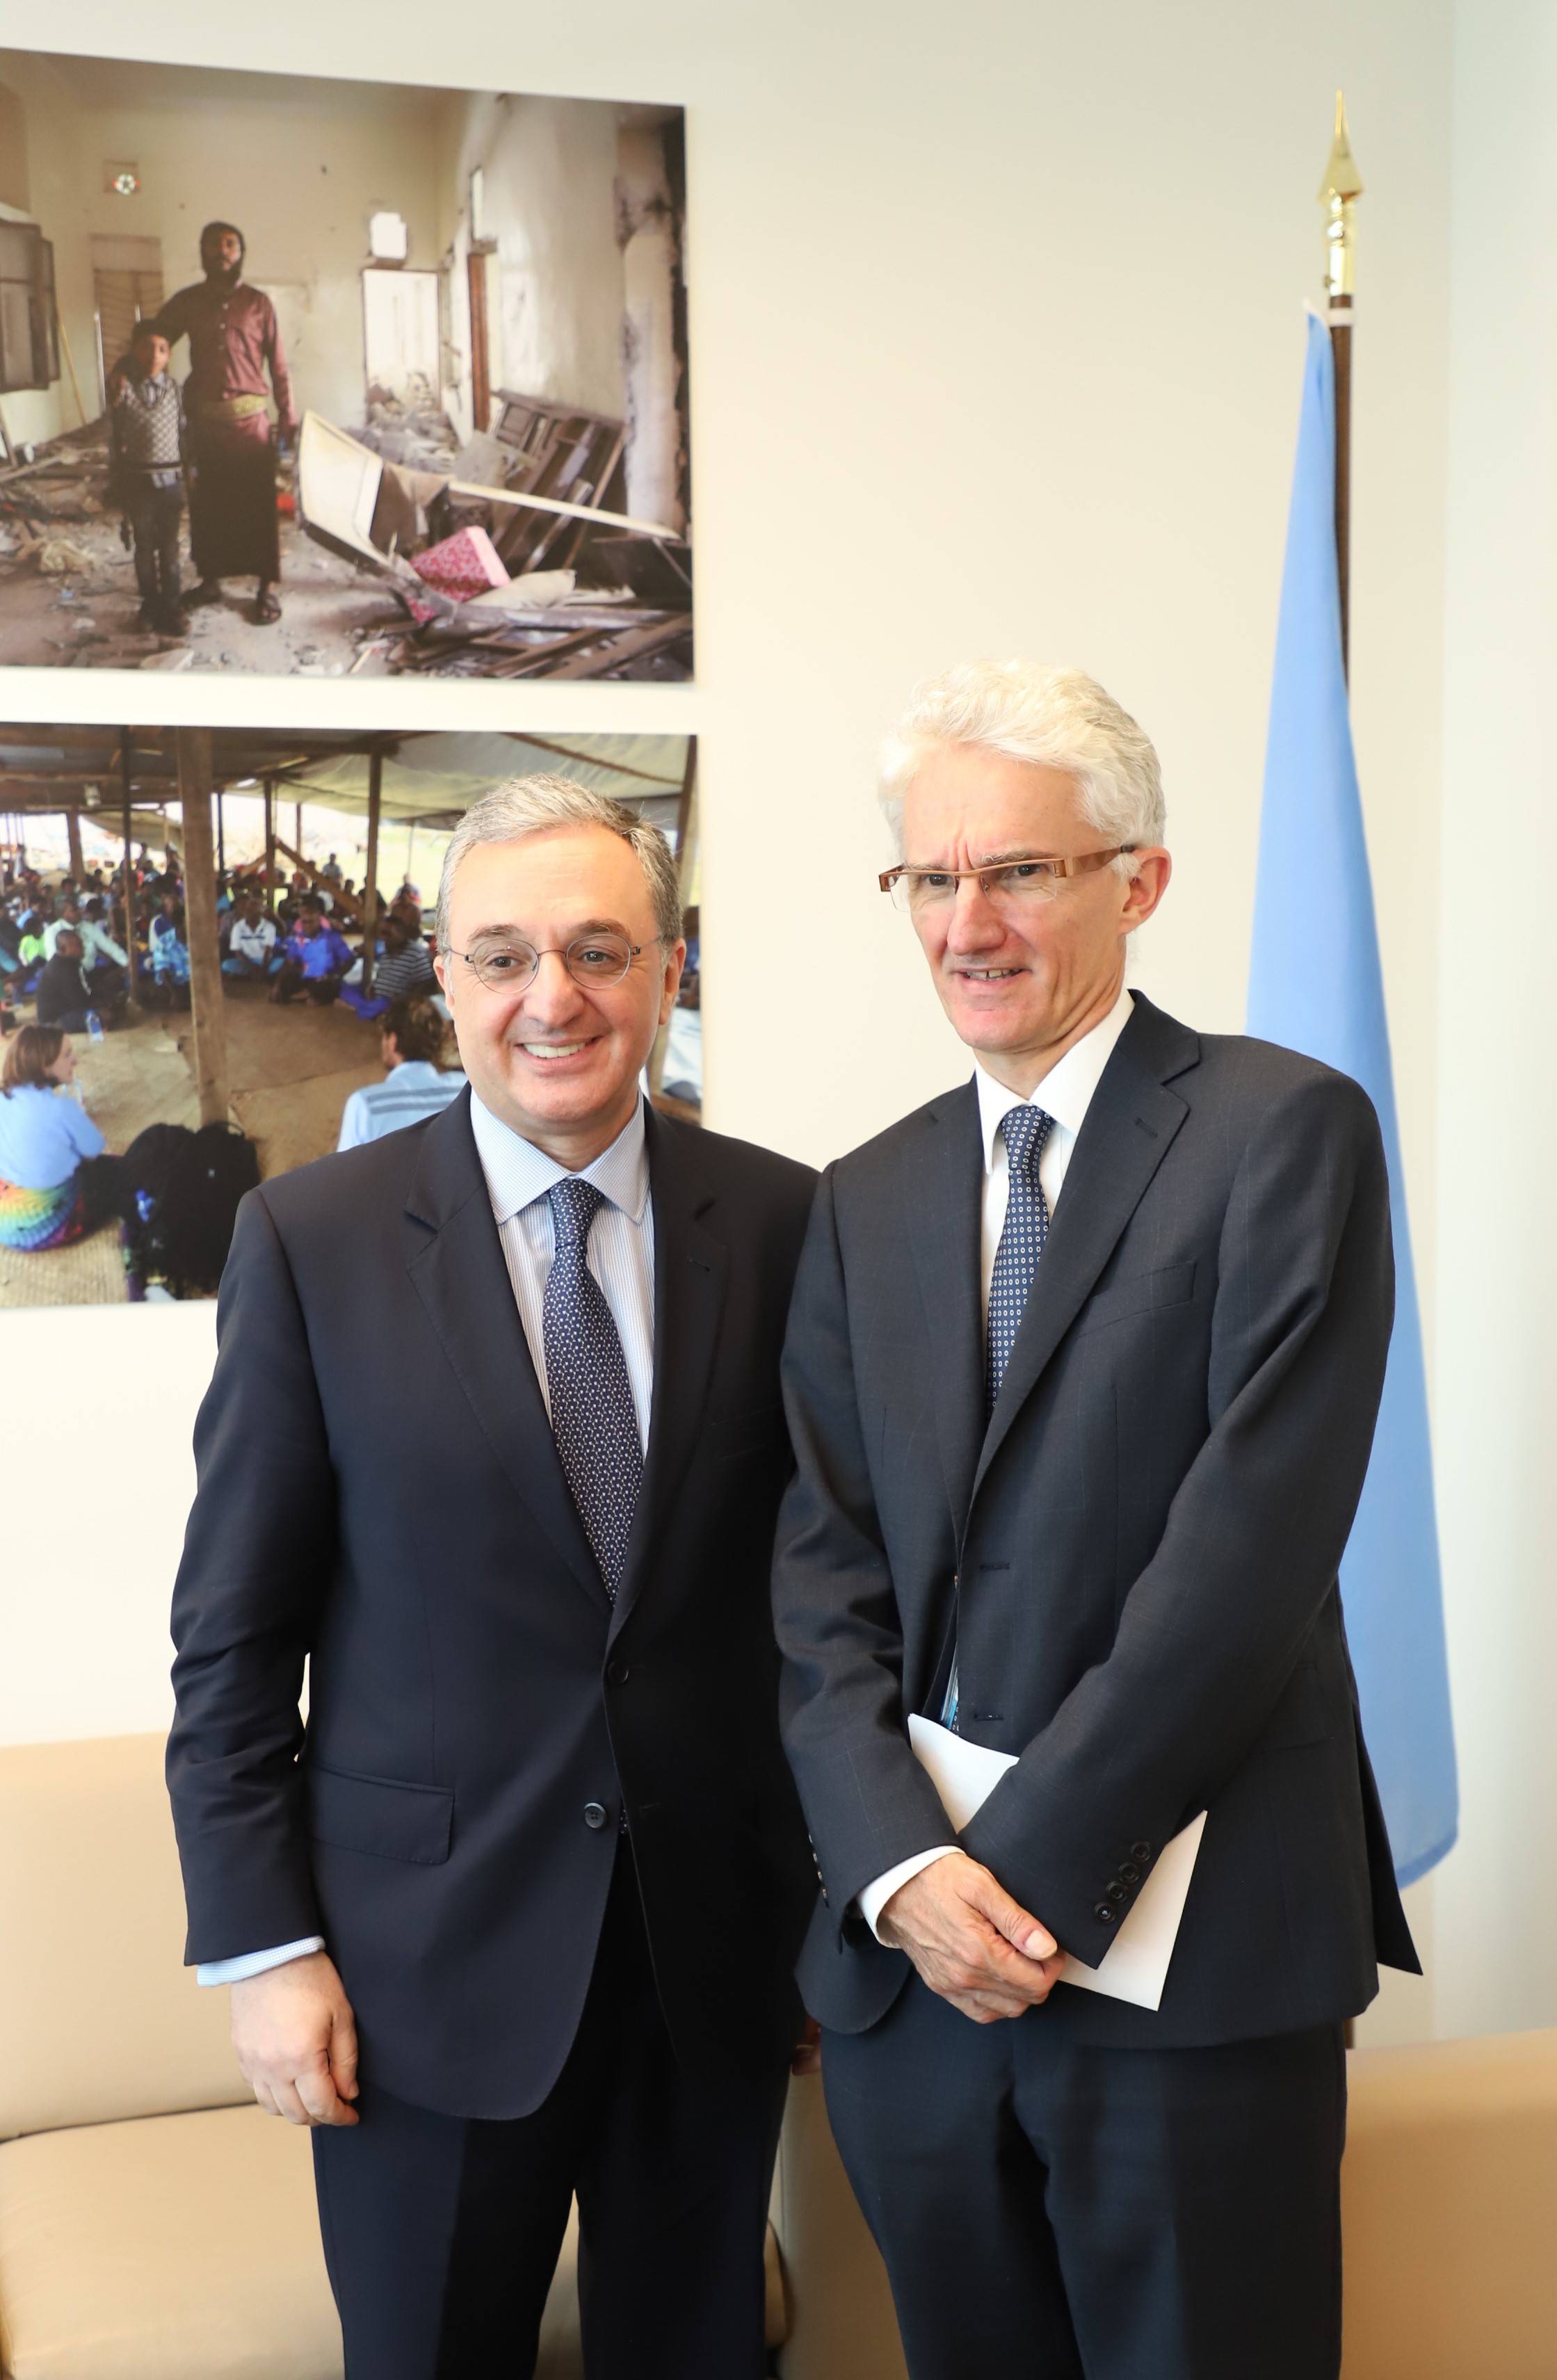 Meeting of Foreign Minister with UN Under-Secretary-General for Humanitarian Affairs and Emergency Relief Coordinator